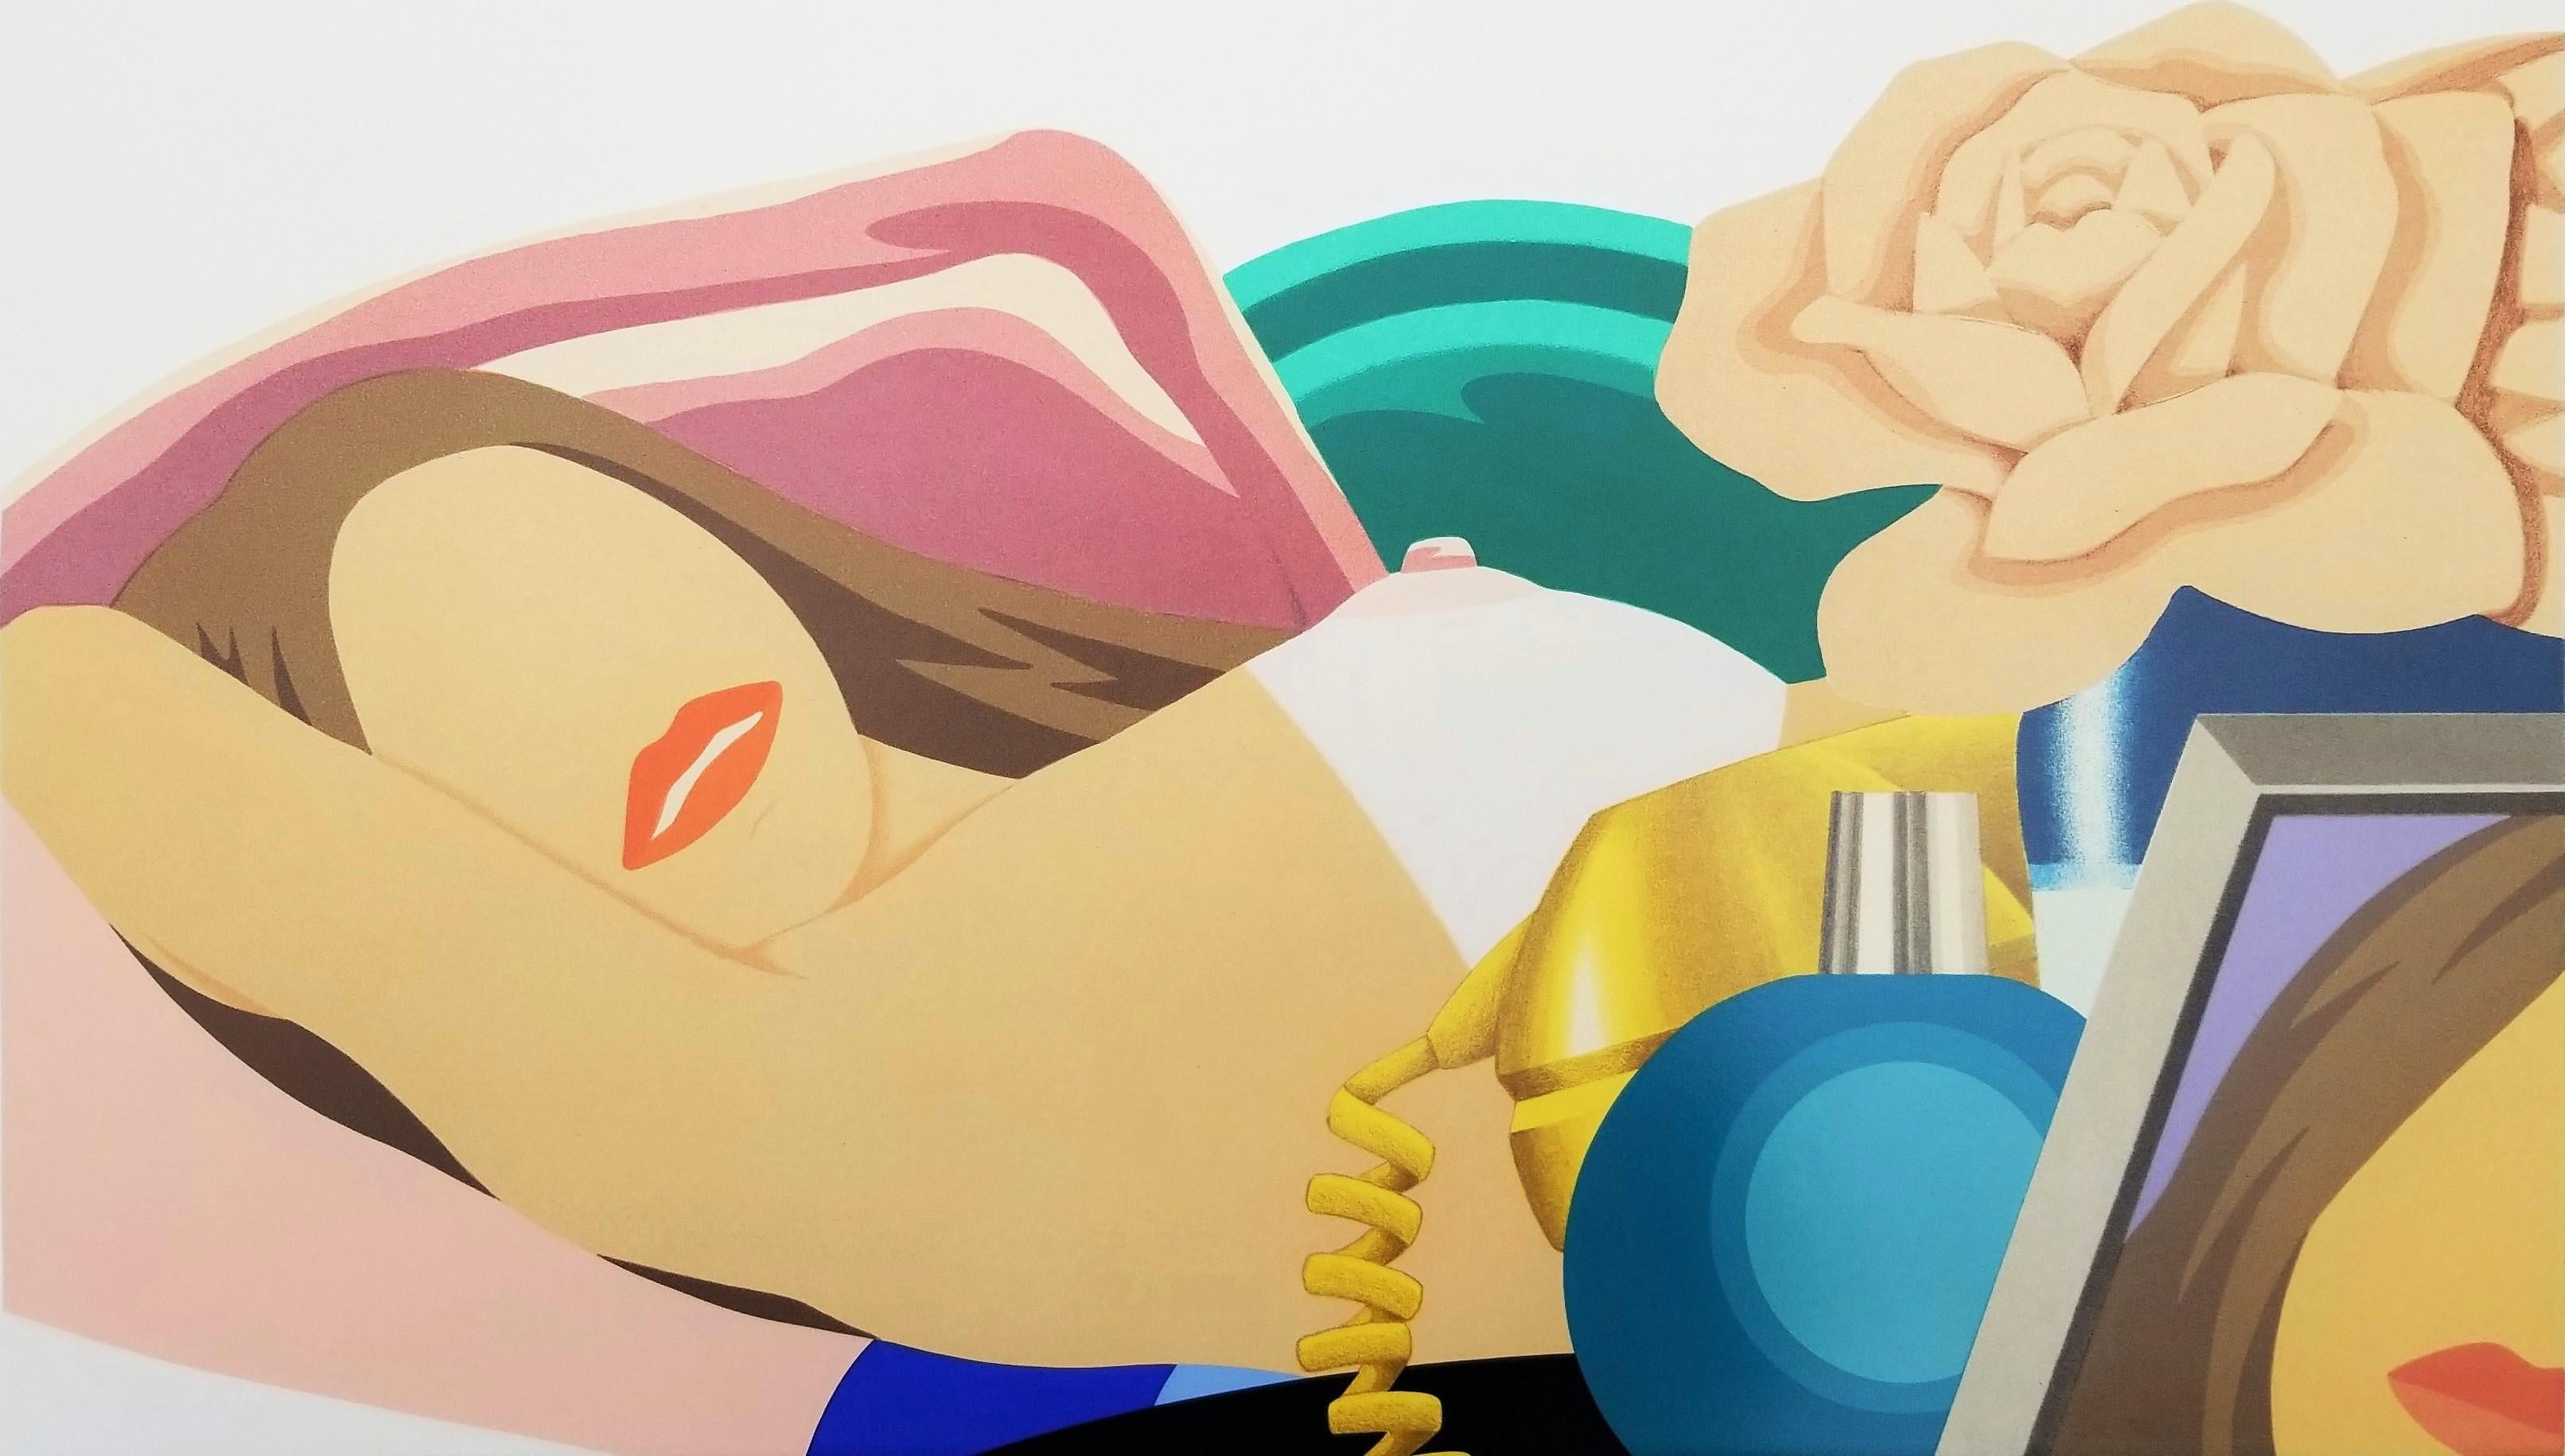 Artist: Tom Wesselmann (American, 1931-2004)
Title: "Nude (Lithograph)"
*Signed, dated, and numbered by Wesselmann in pencil lower right
Year: 1976
Medium: Original Lithograph and Screenprint with Embossing on Rives BFK paper
Limited edition: 34/75,